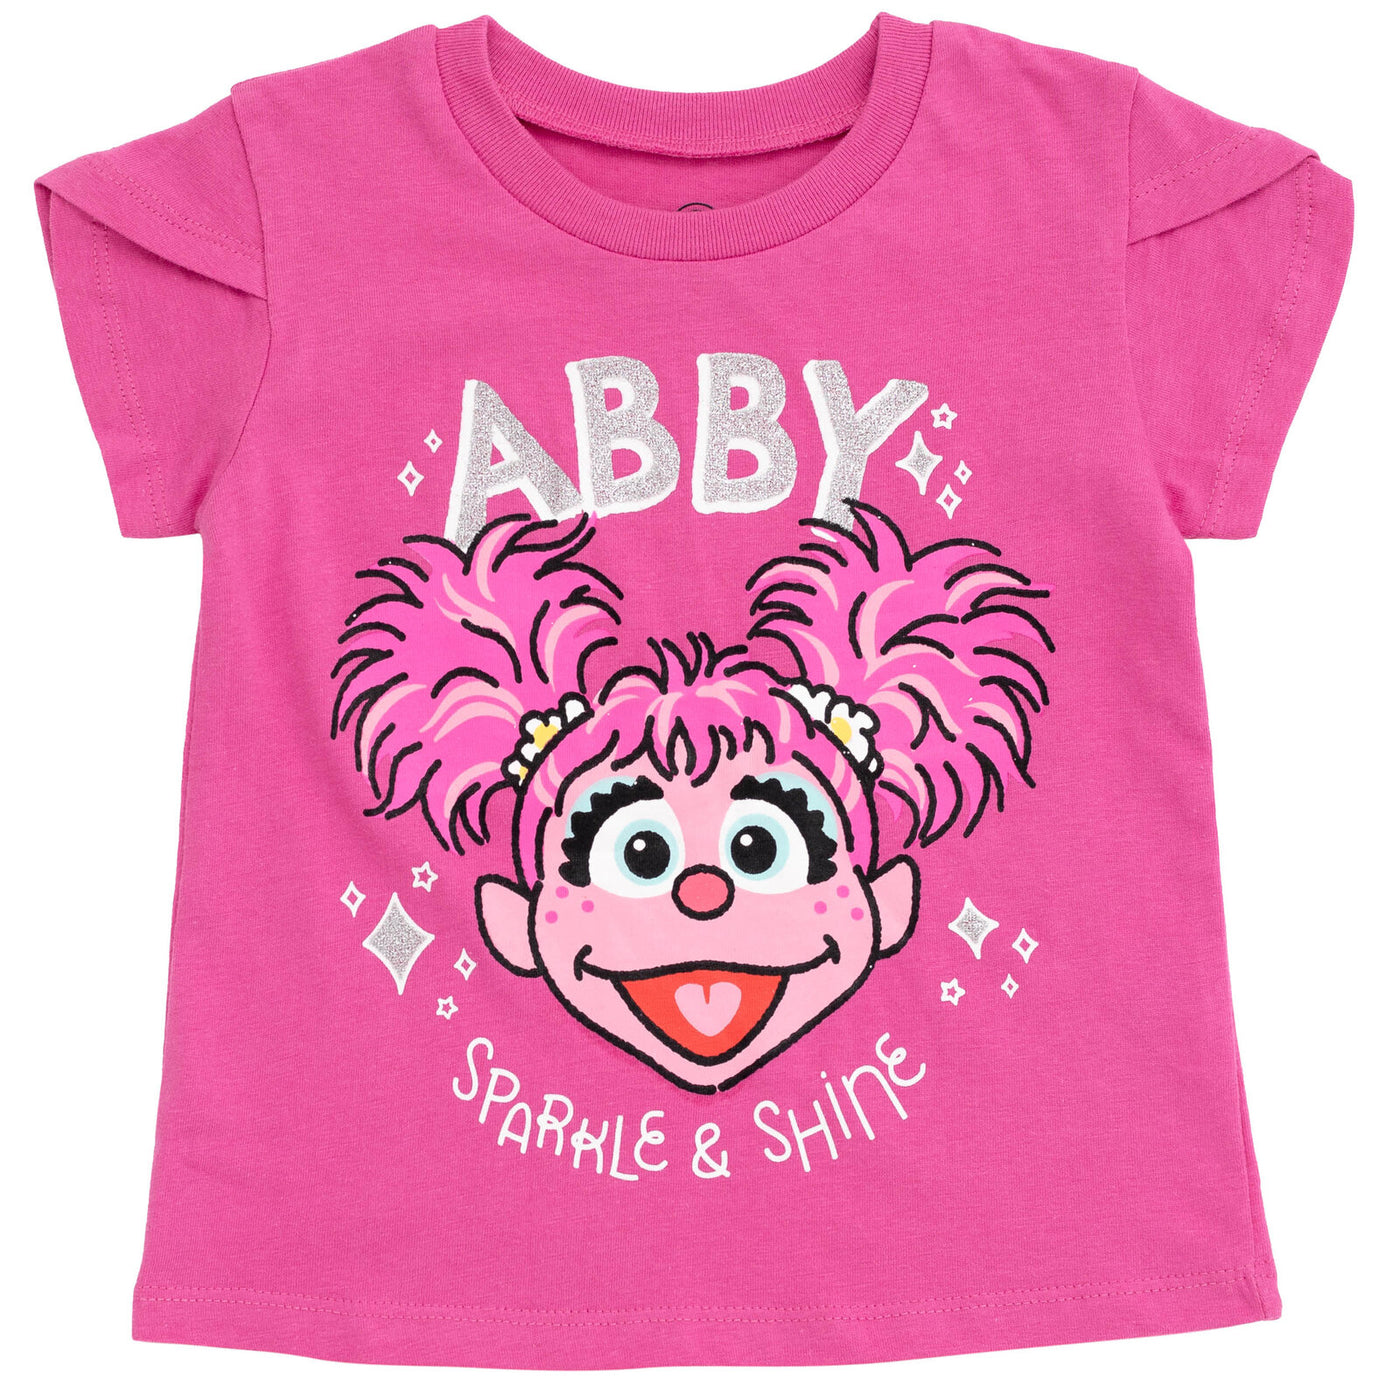 Sesame Street Abby Cadabby T-Shirt Tulle Mesh Skirt and Scrunchie 3 Piece Outfit Set